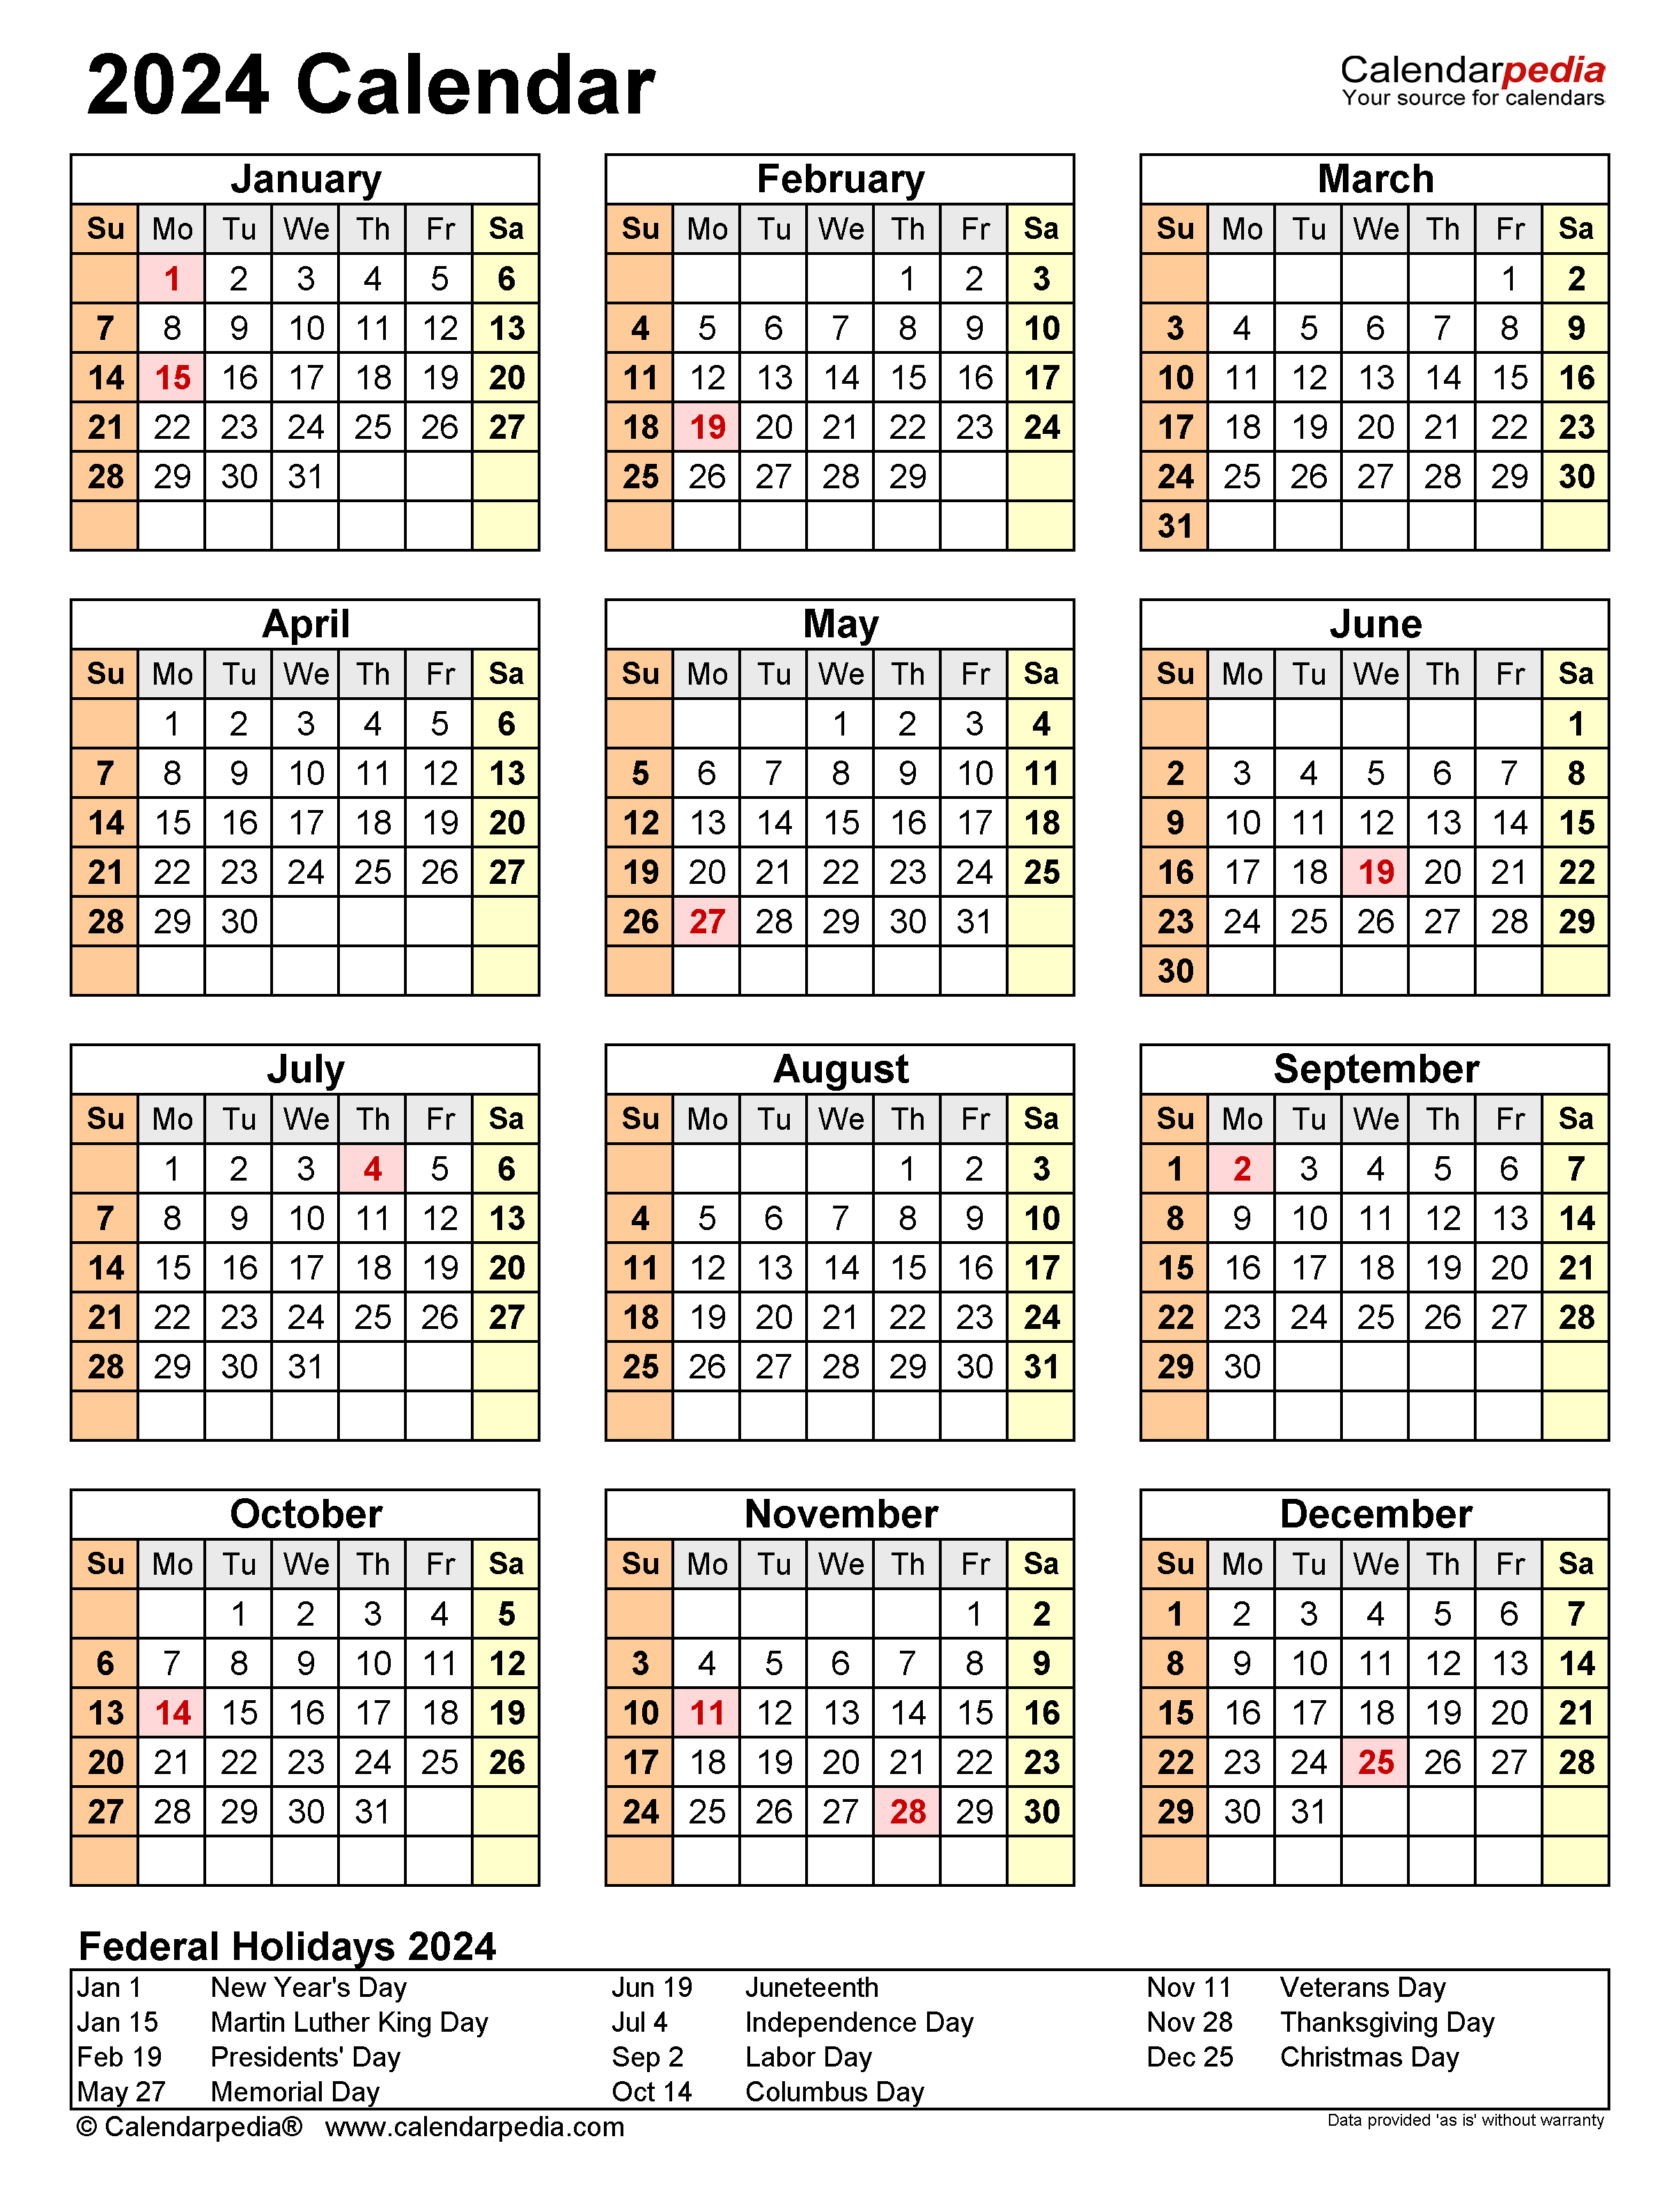 Free Printable 2024 Calendar With Holidays Crownflourmills | Free Printable 2024 Calendar With Holidays Waterproof Paper